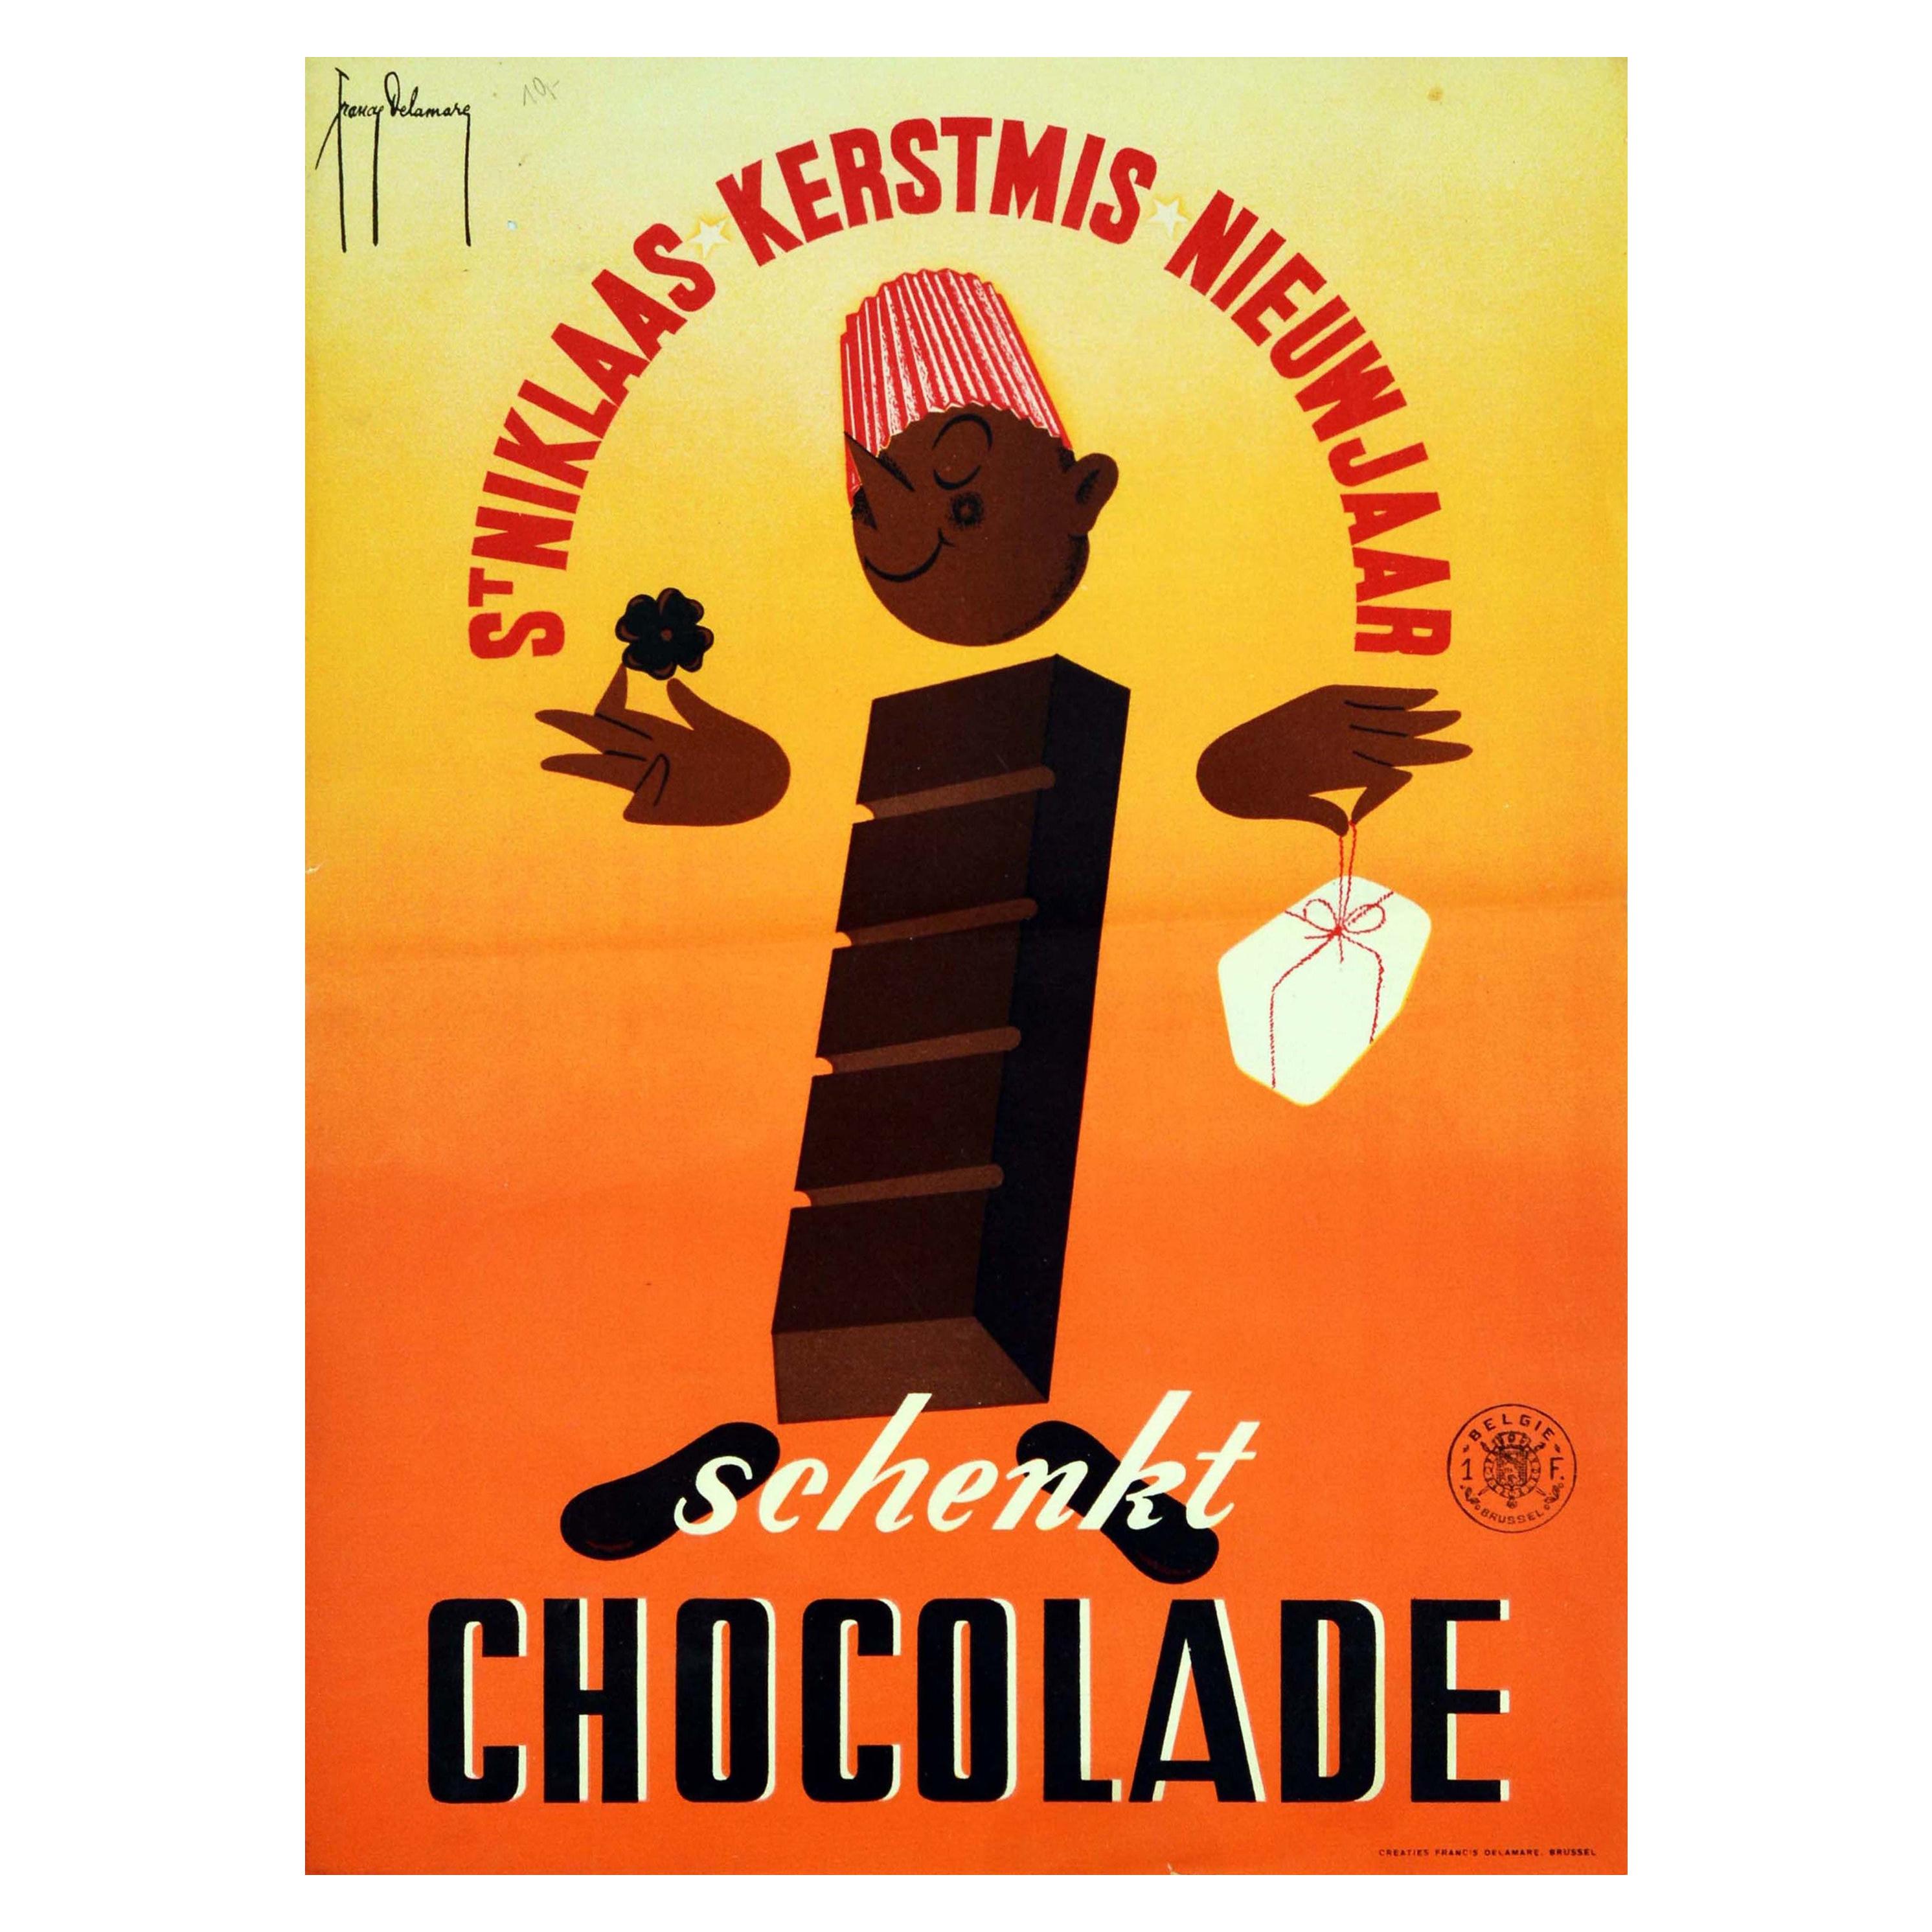 Original Vintage Poster Give Chocolate Gift Christmas New Year Midcentury Design